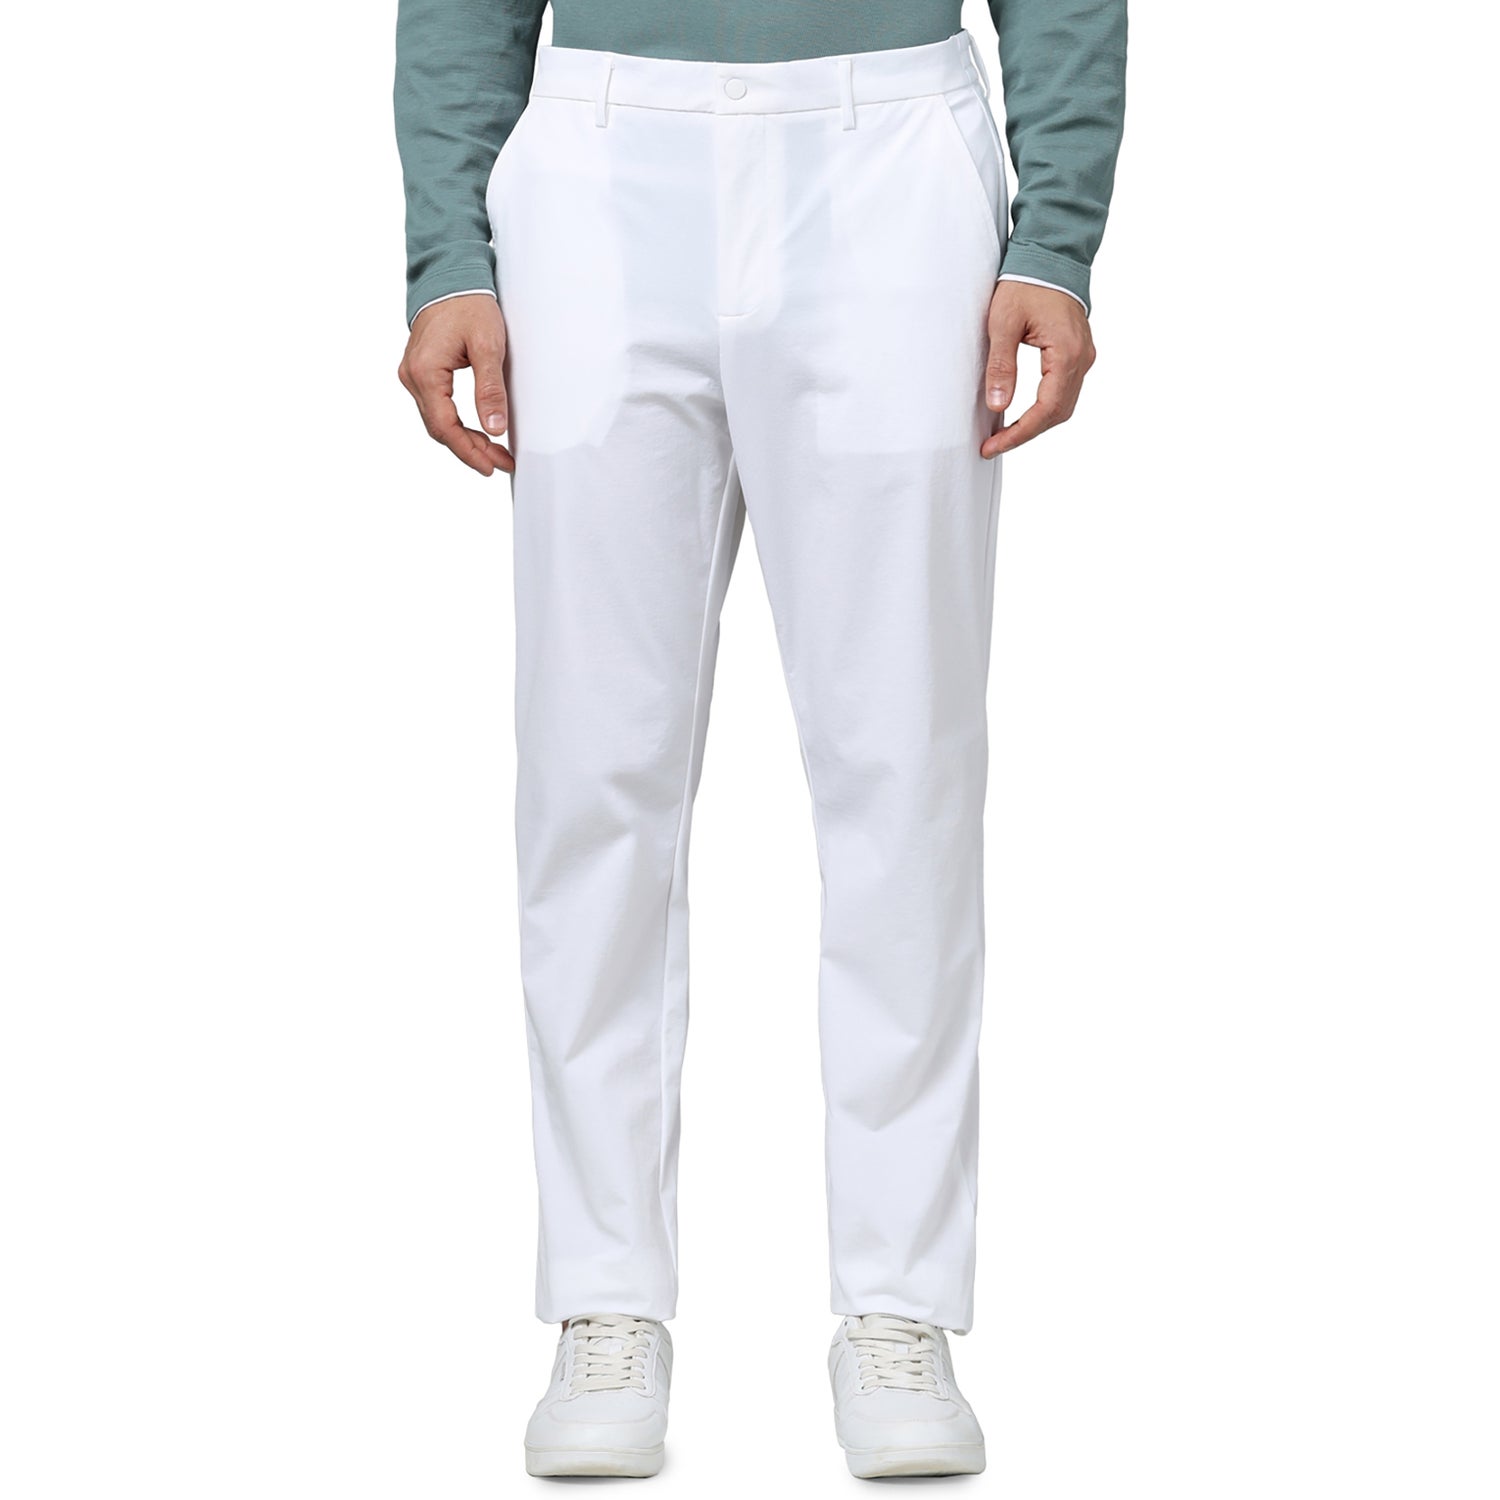 Men's White Solid Slim Fit Nylon Casual Trousers (GONYL)